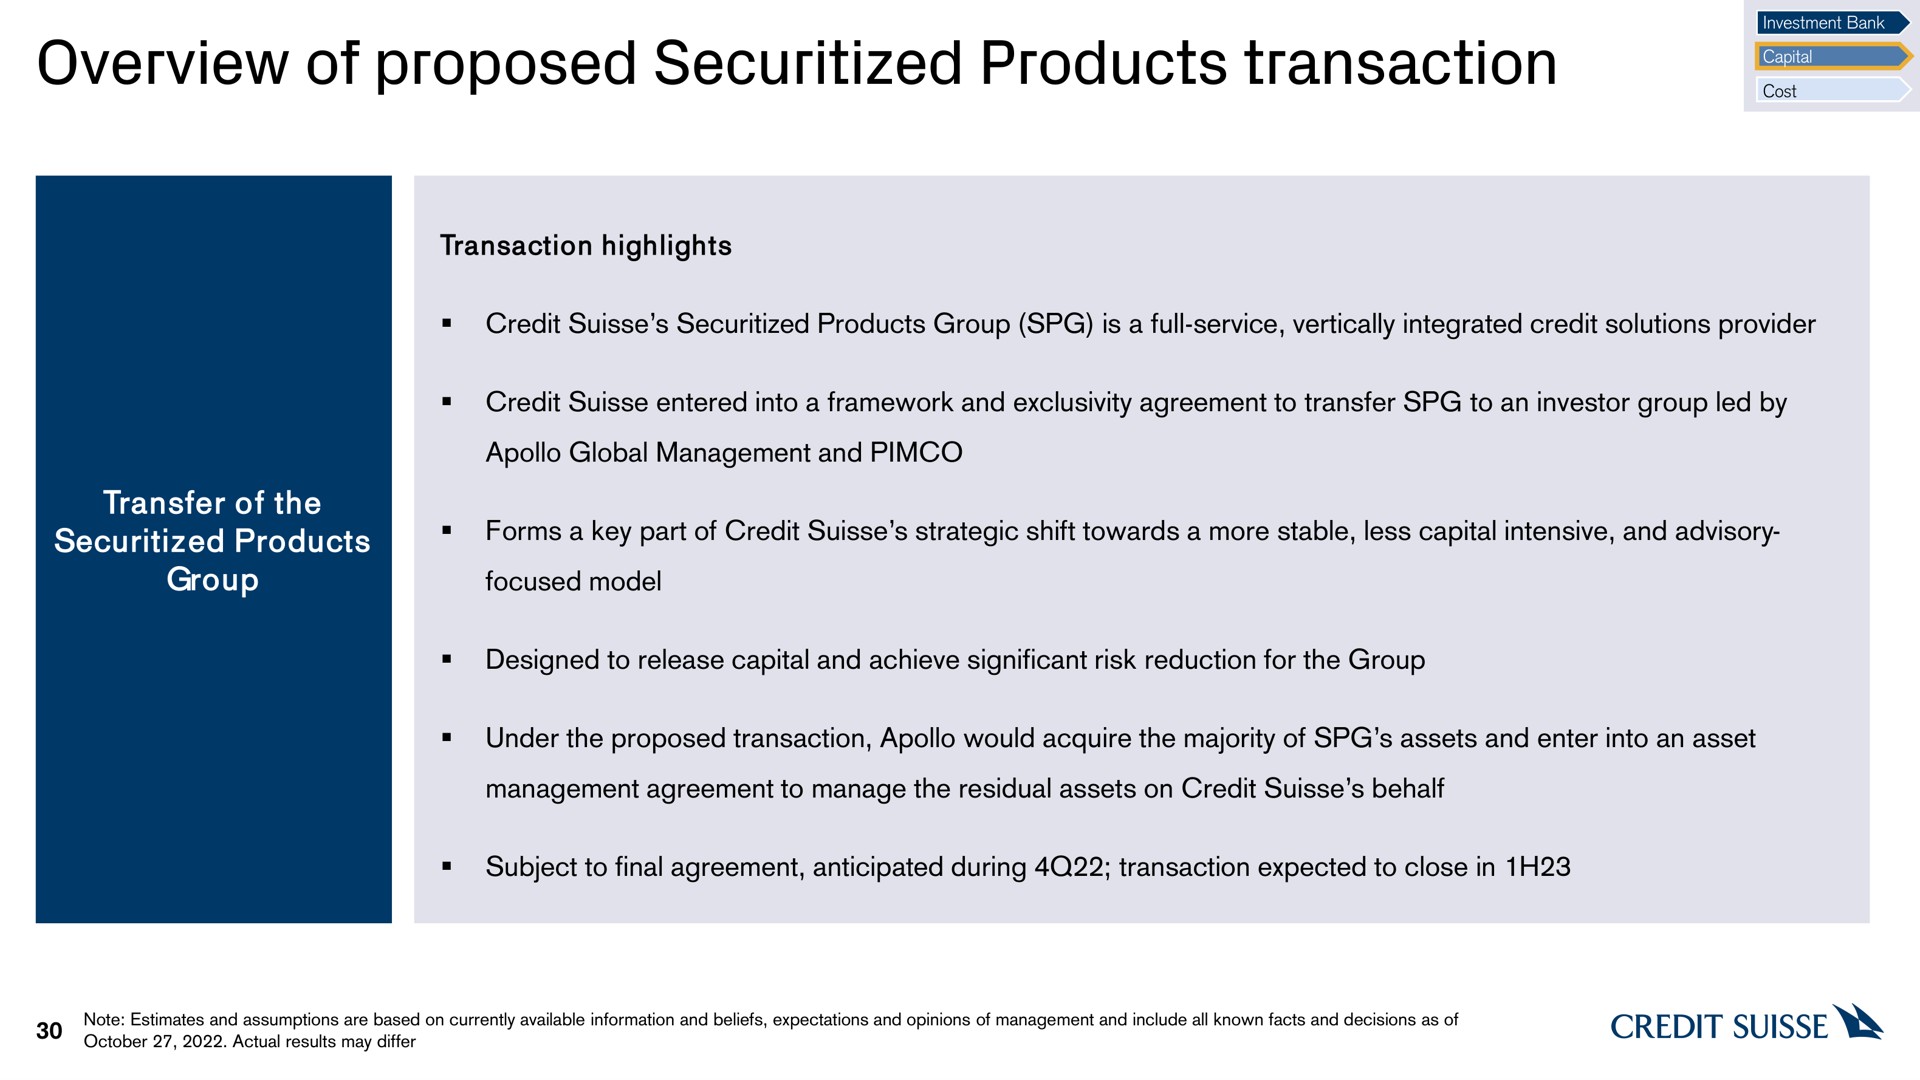 overview of proposed products transaction | Credit Suisse